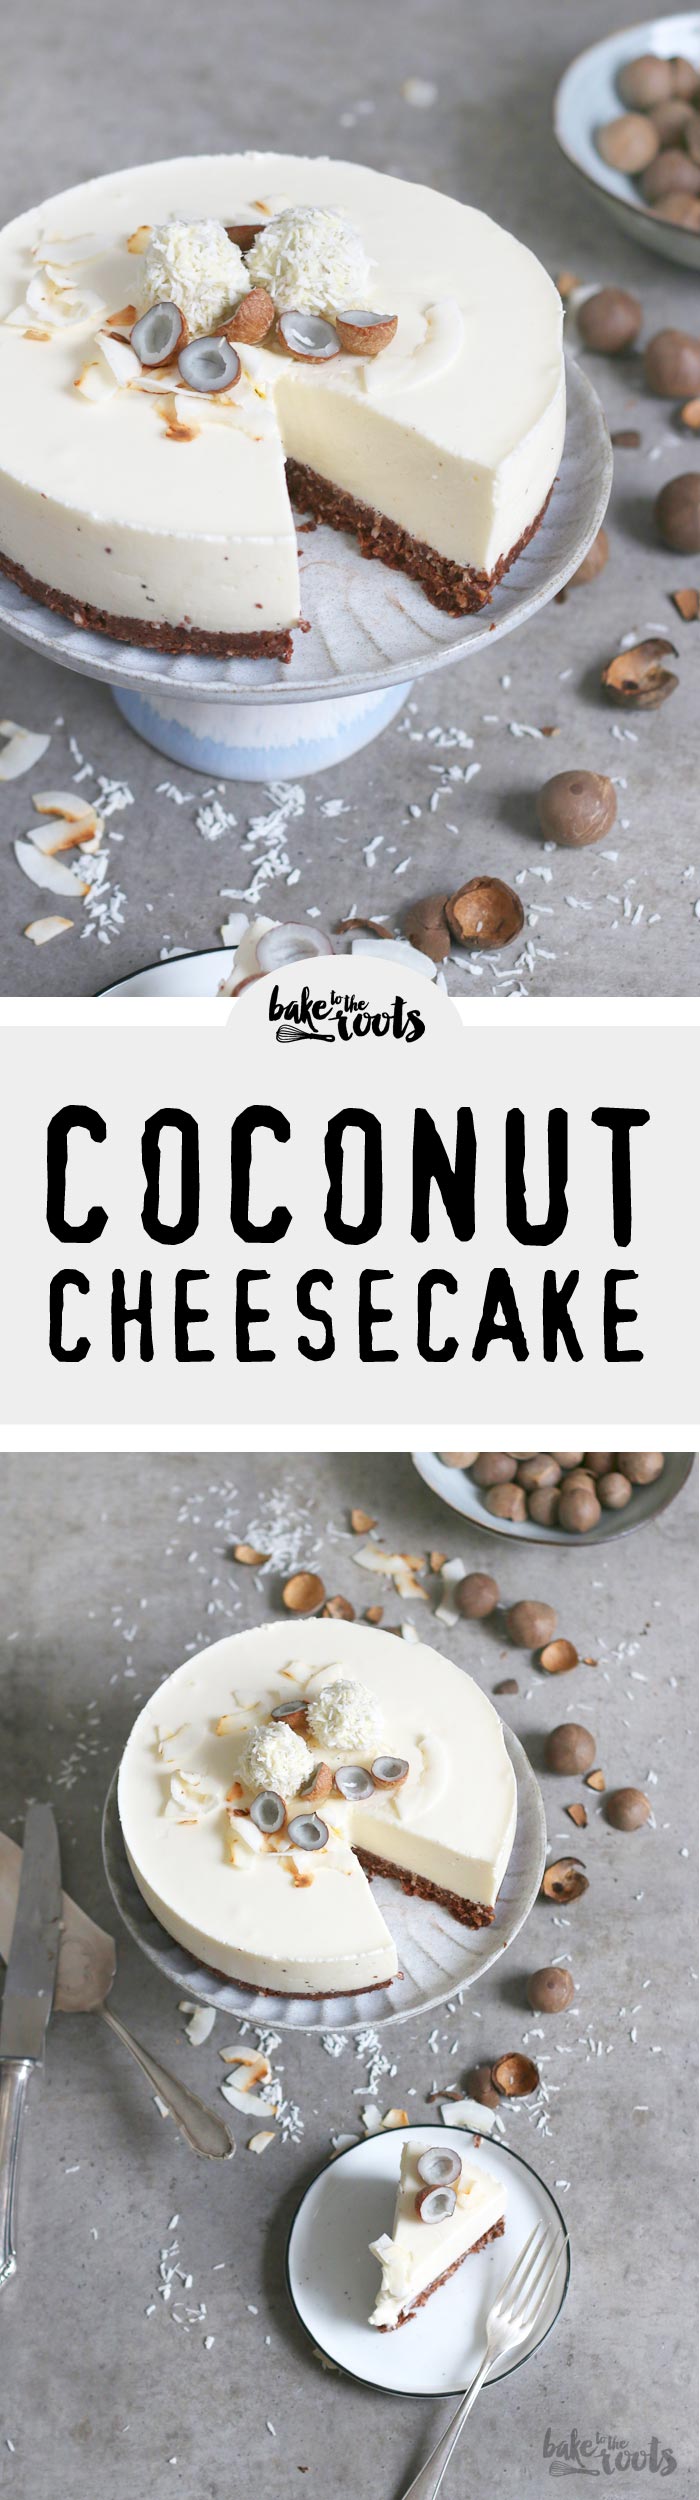 DDelicious No-Bake Coconut Cheesecake with Batida de Coco – fresh and creamy | Bake to the roots